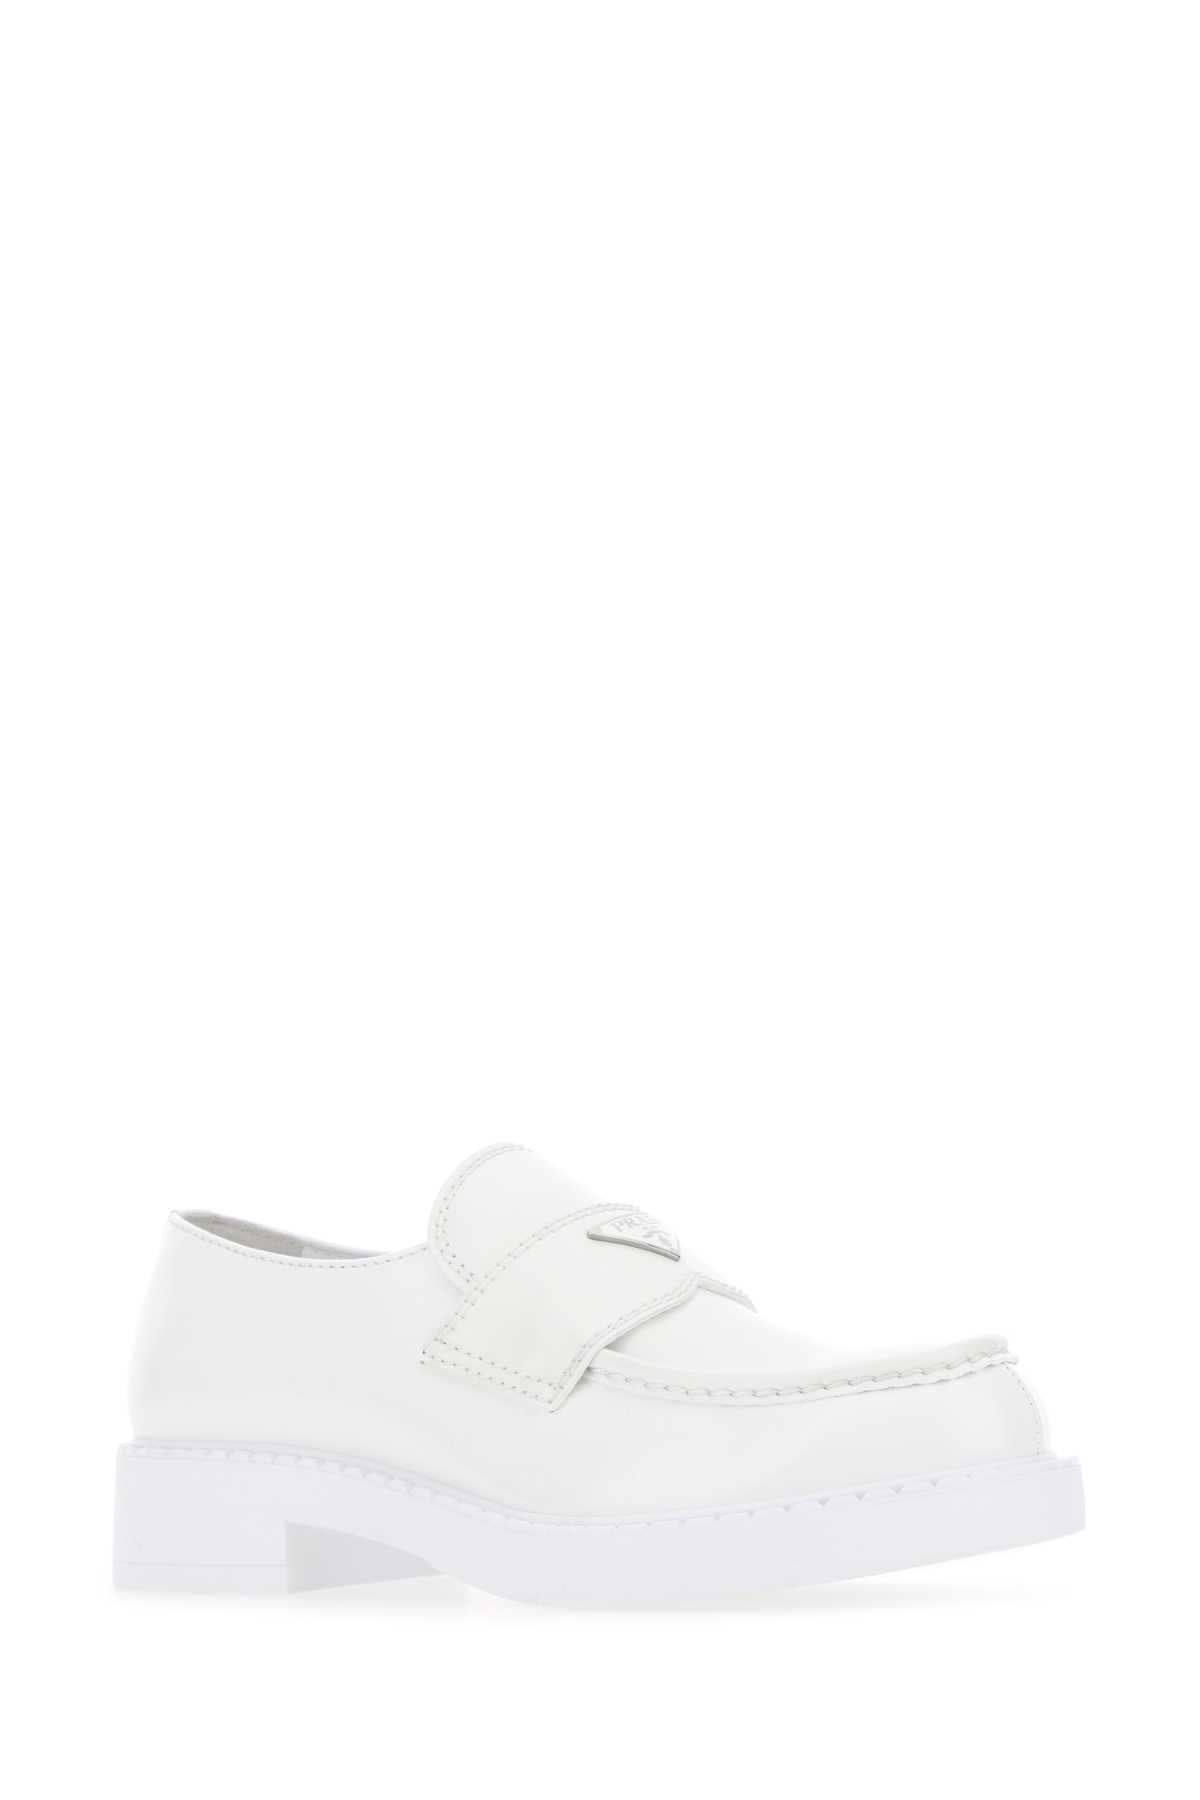 Prada White Leather Loafers In F0009